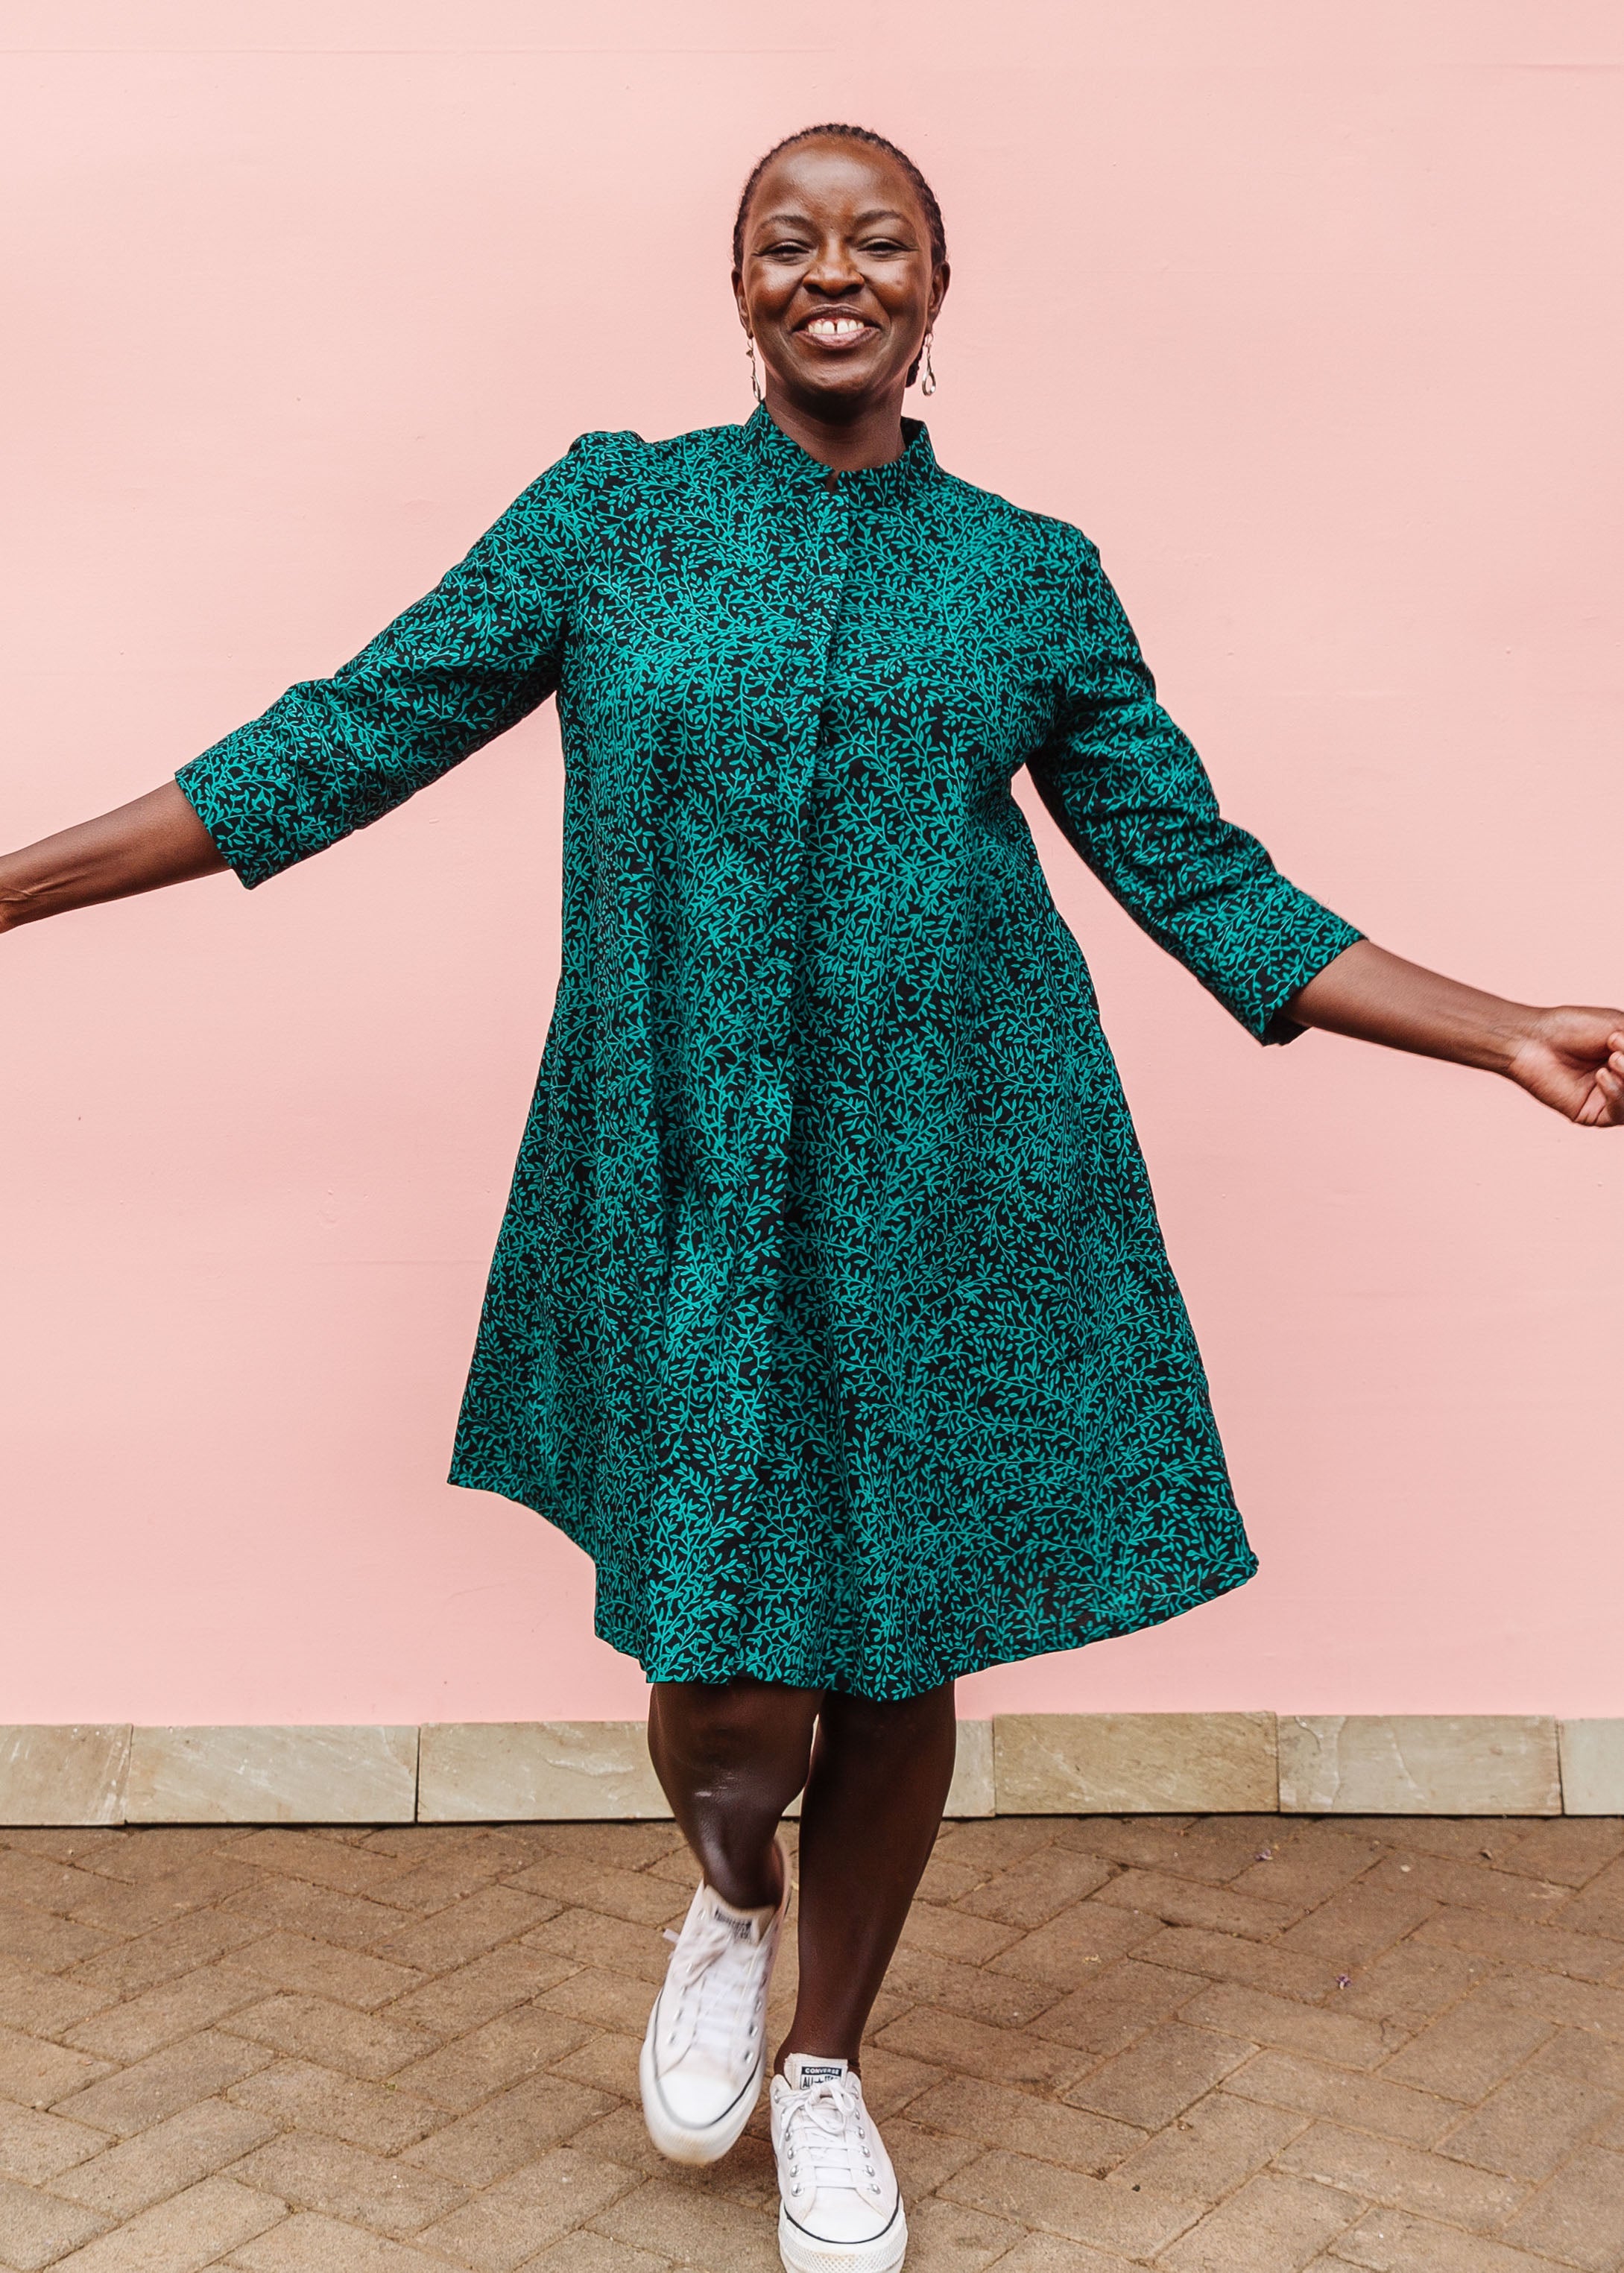 Model wearing black and green dress with small vine print.